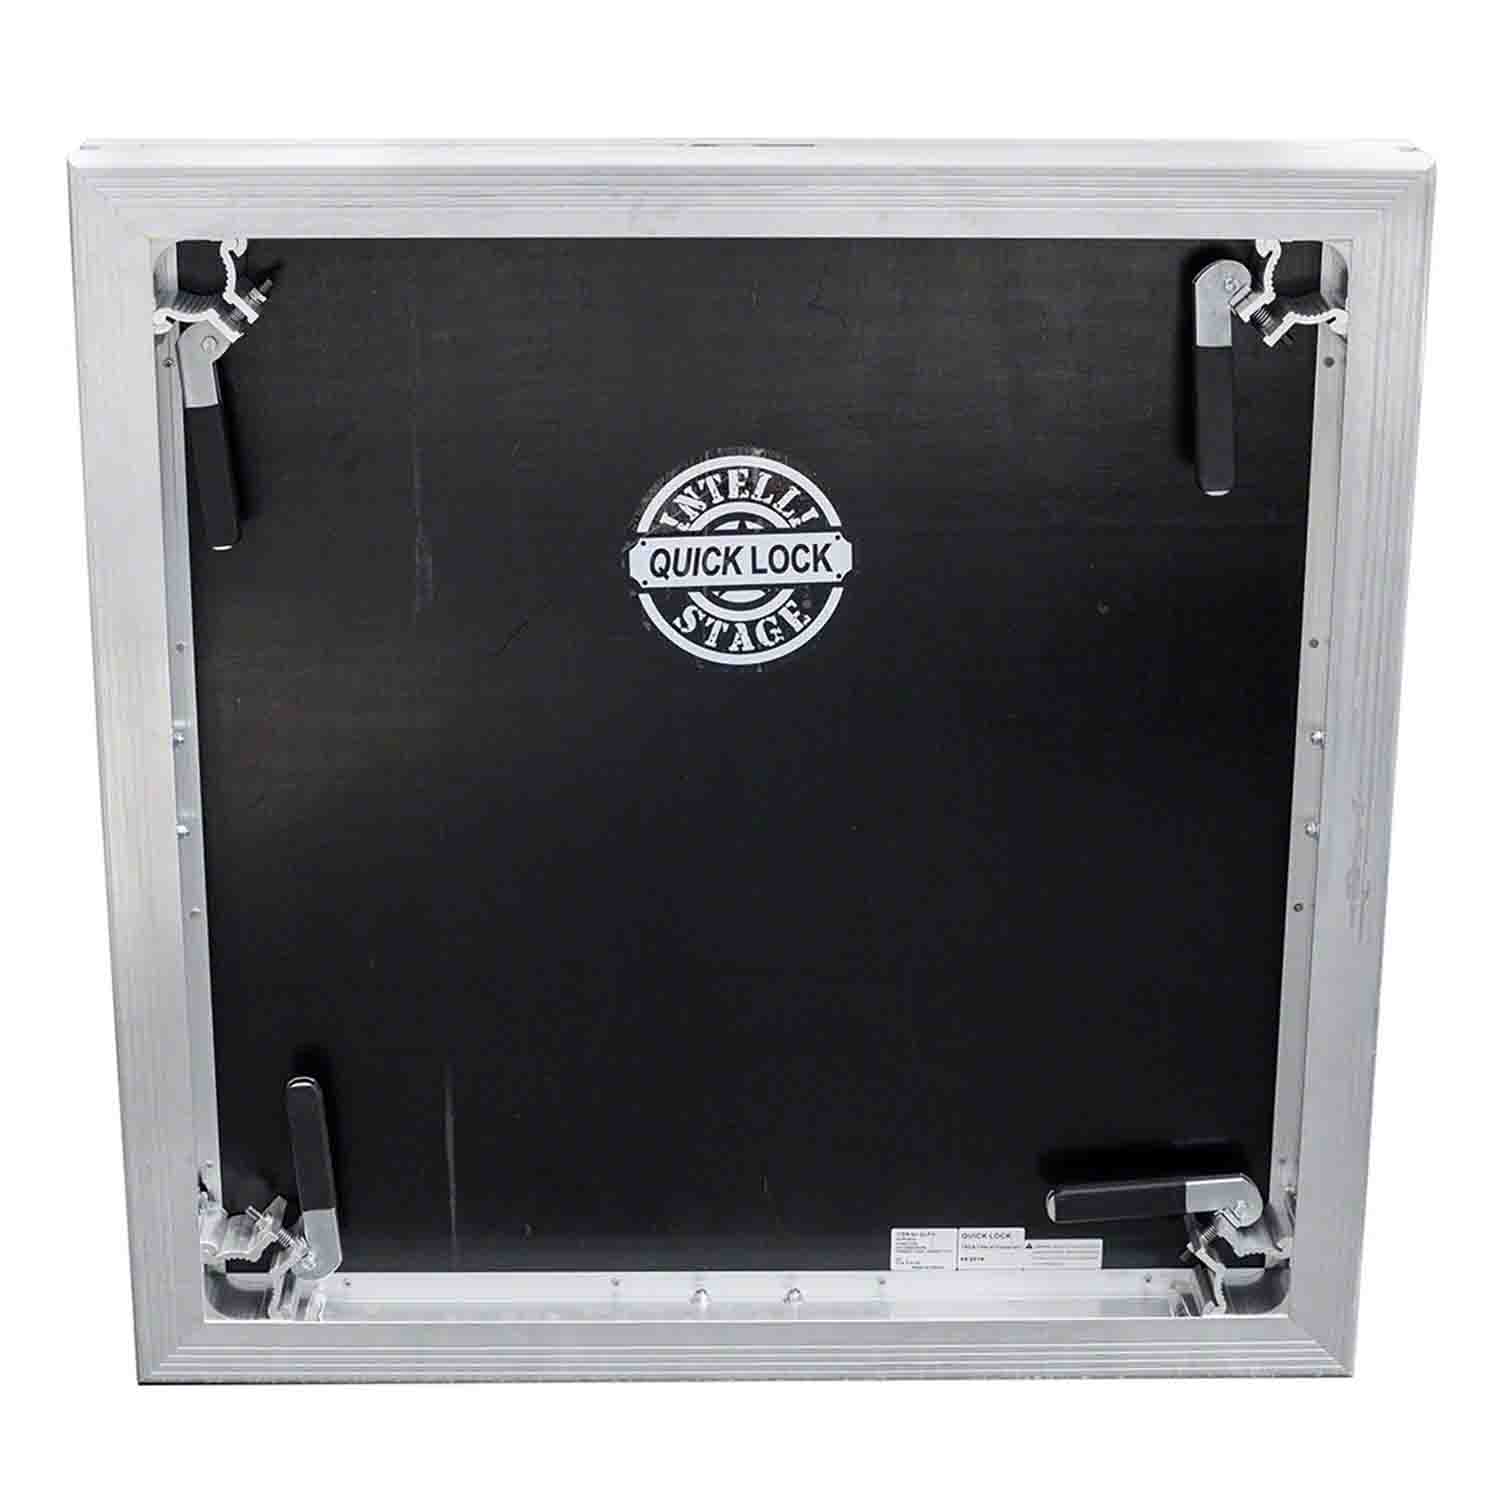 IntelliStage Subcomponent QLP3I 3ft x 3ft Industrial Finish Stage Panel - Black - Hollywood DJ